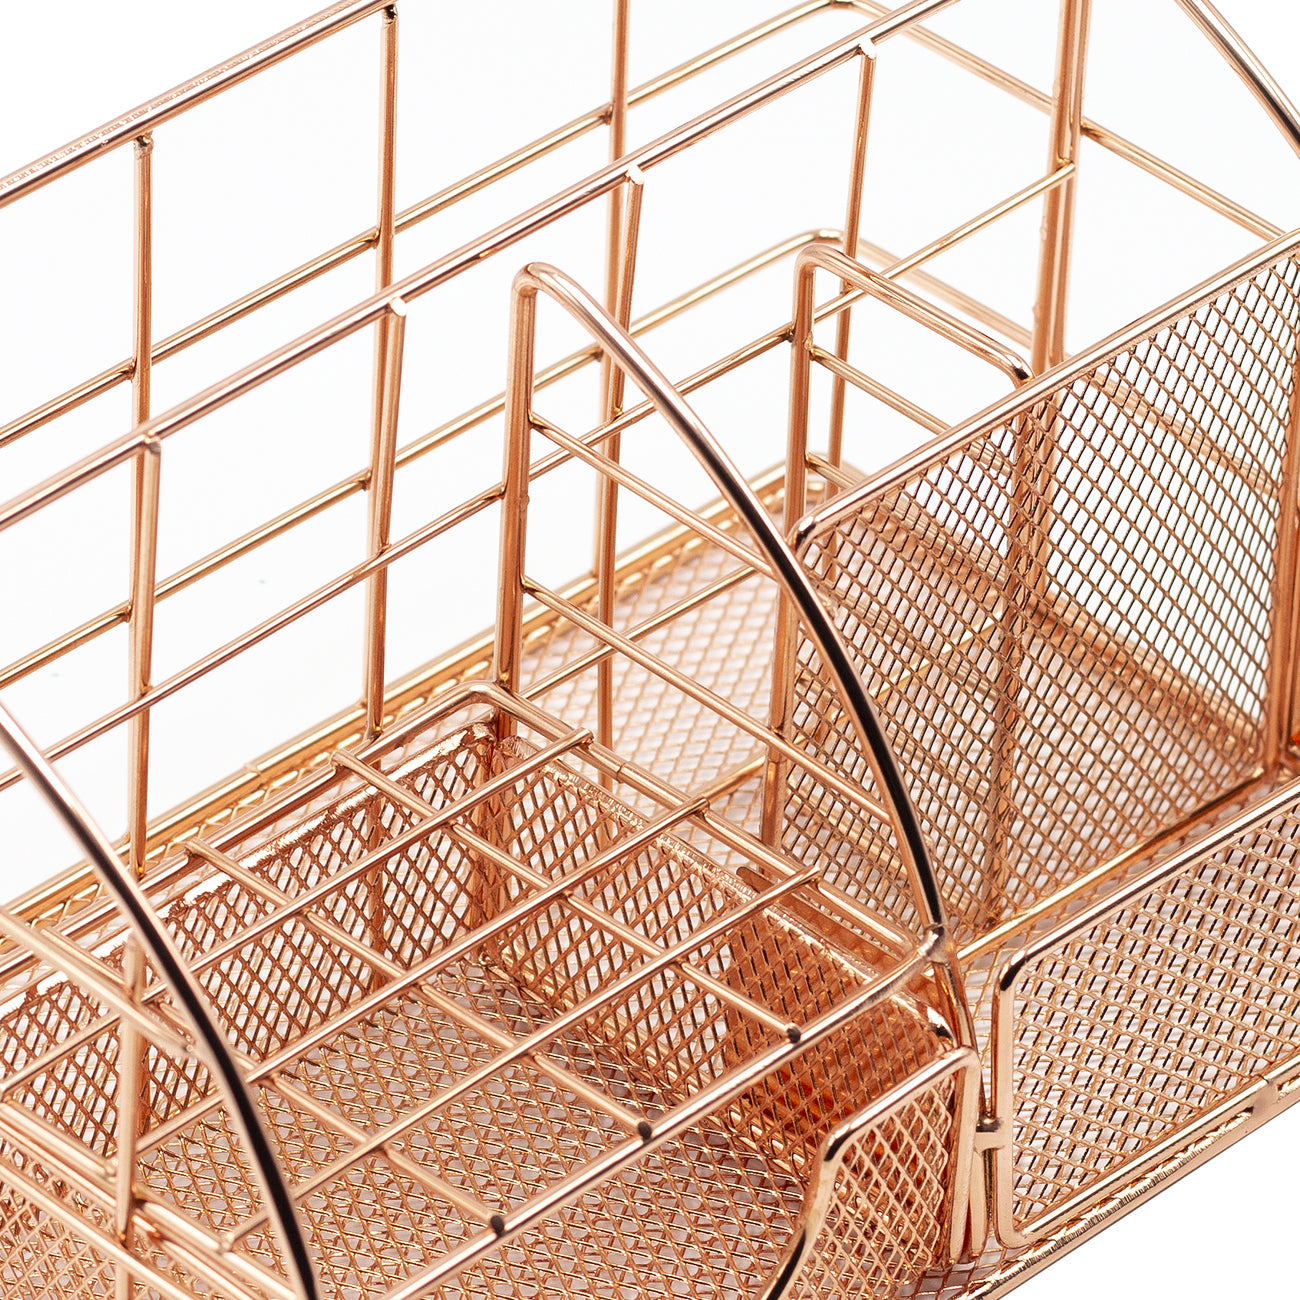 Rose Gold Desk Organizer for Women, Mesh Office Supplies Desk Accessories,  Features 5 Compartments + 1 Mini Sliding Drawer